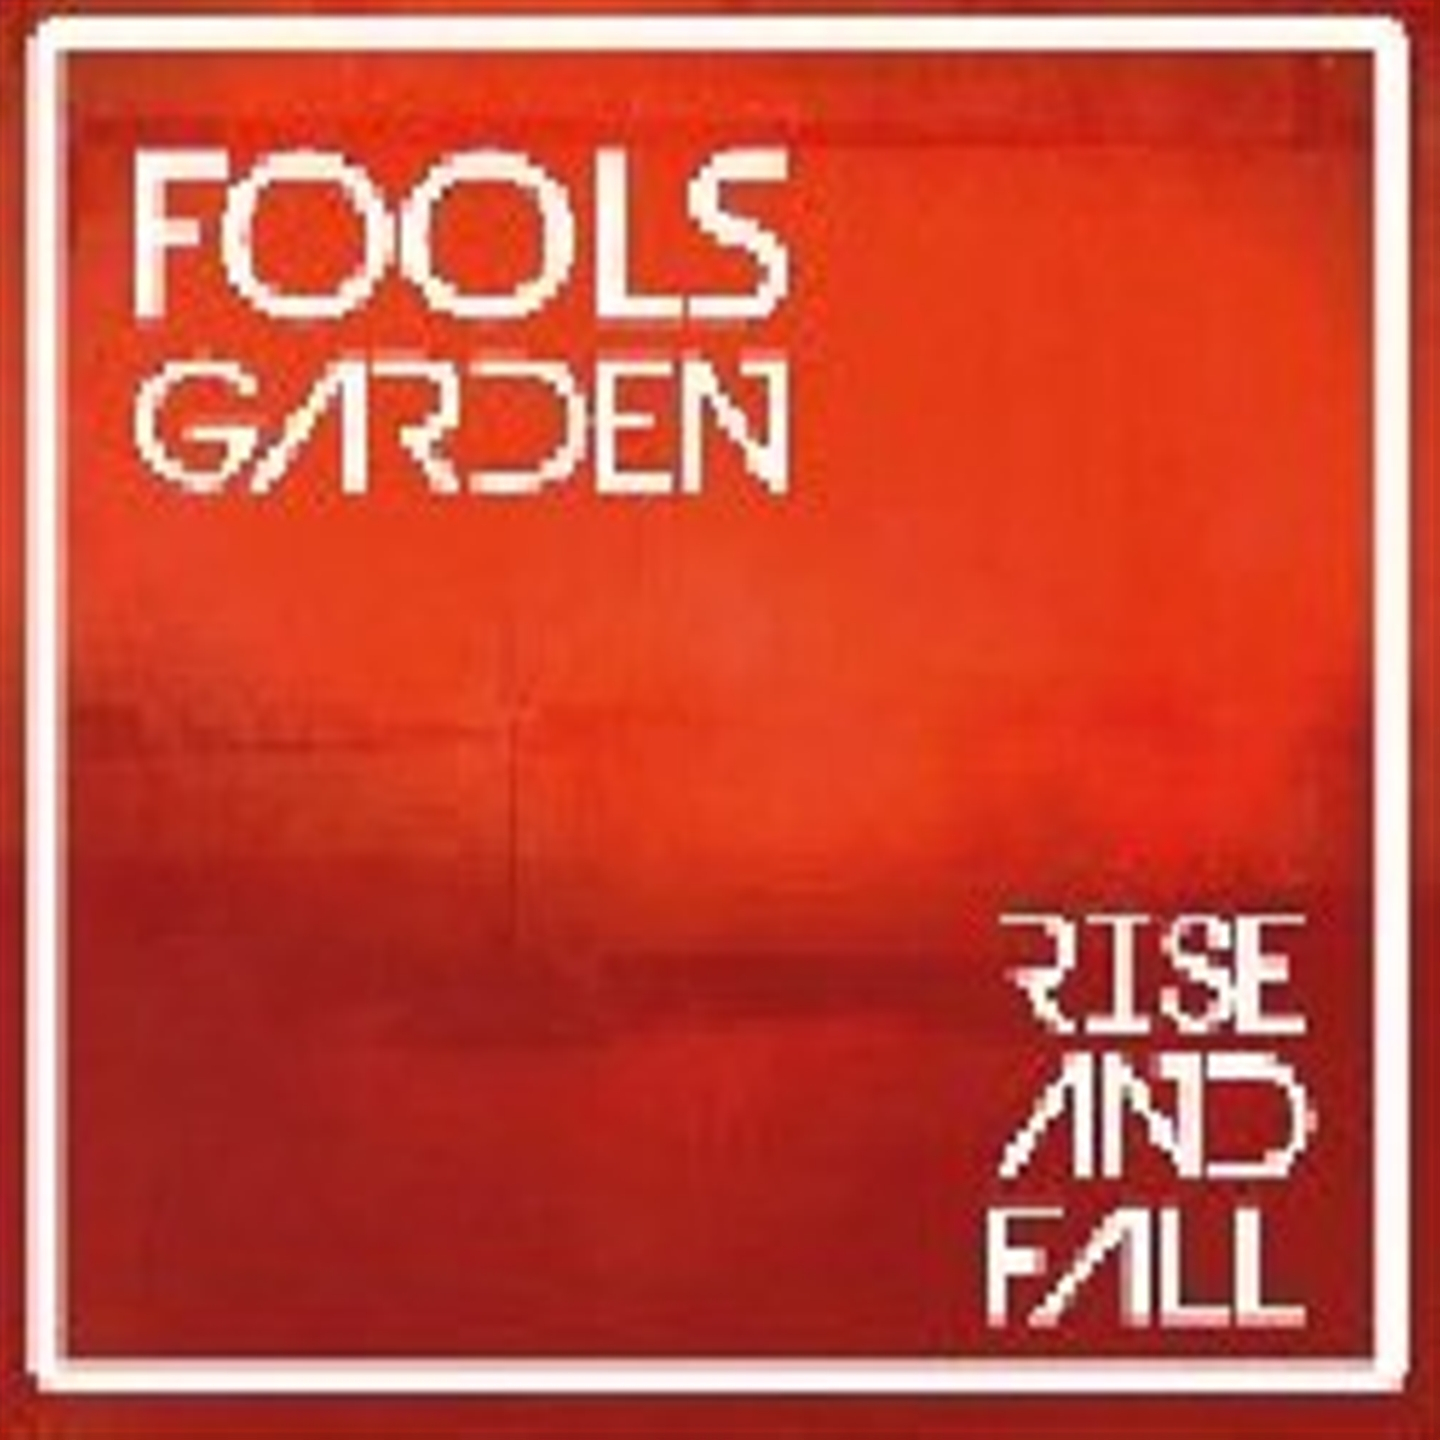 RISE AND FALL [LP]